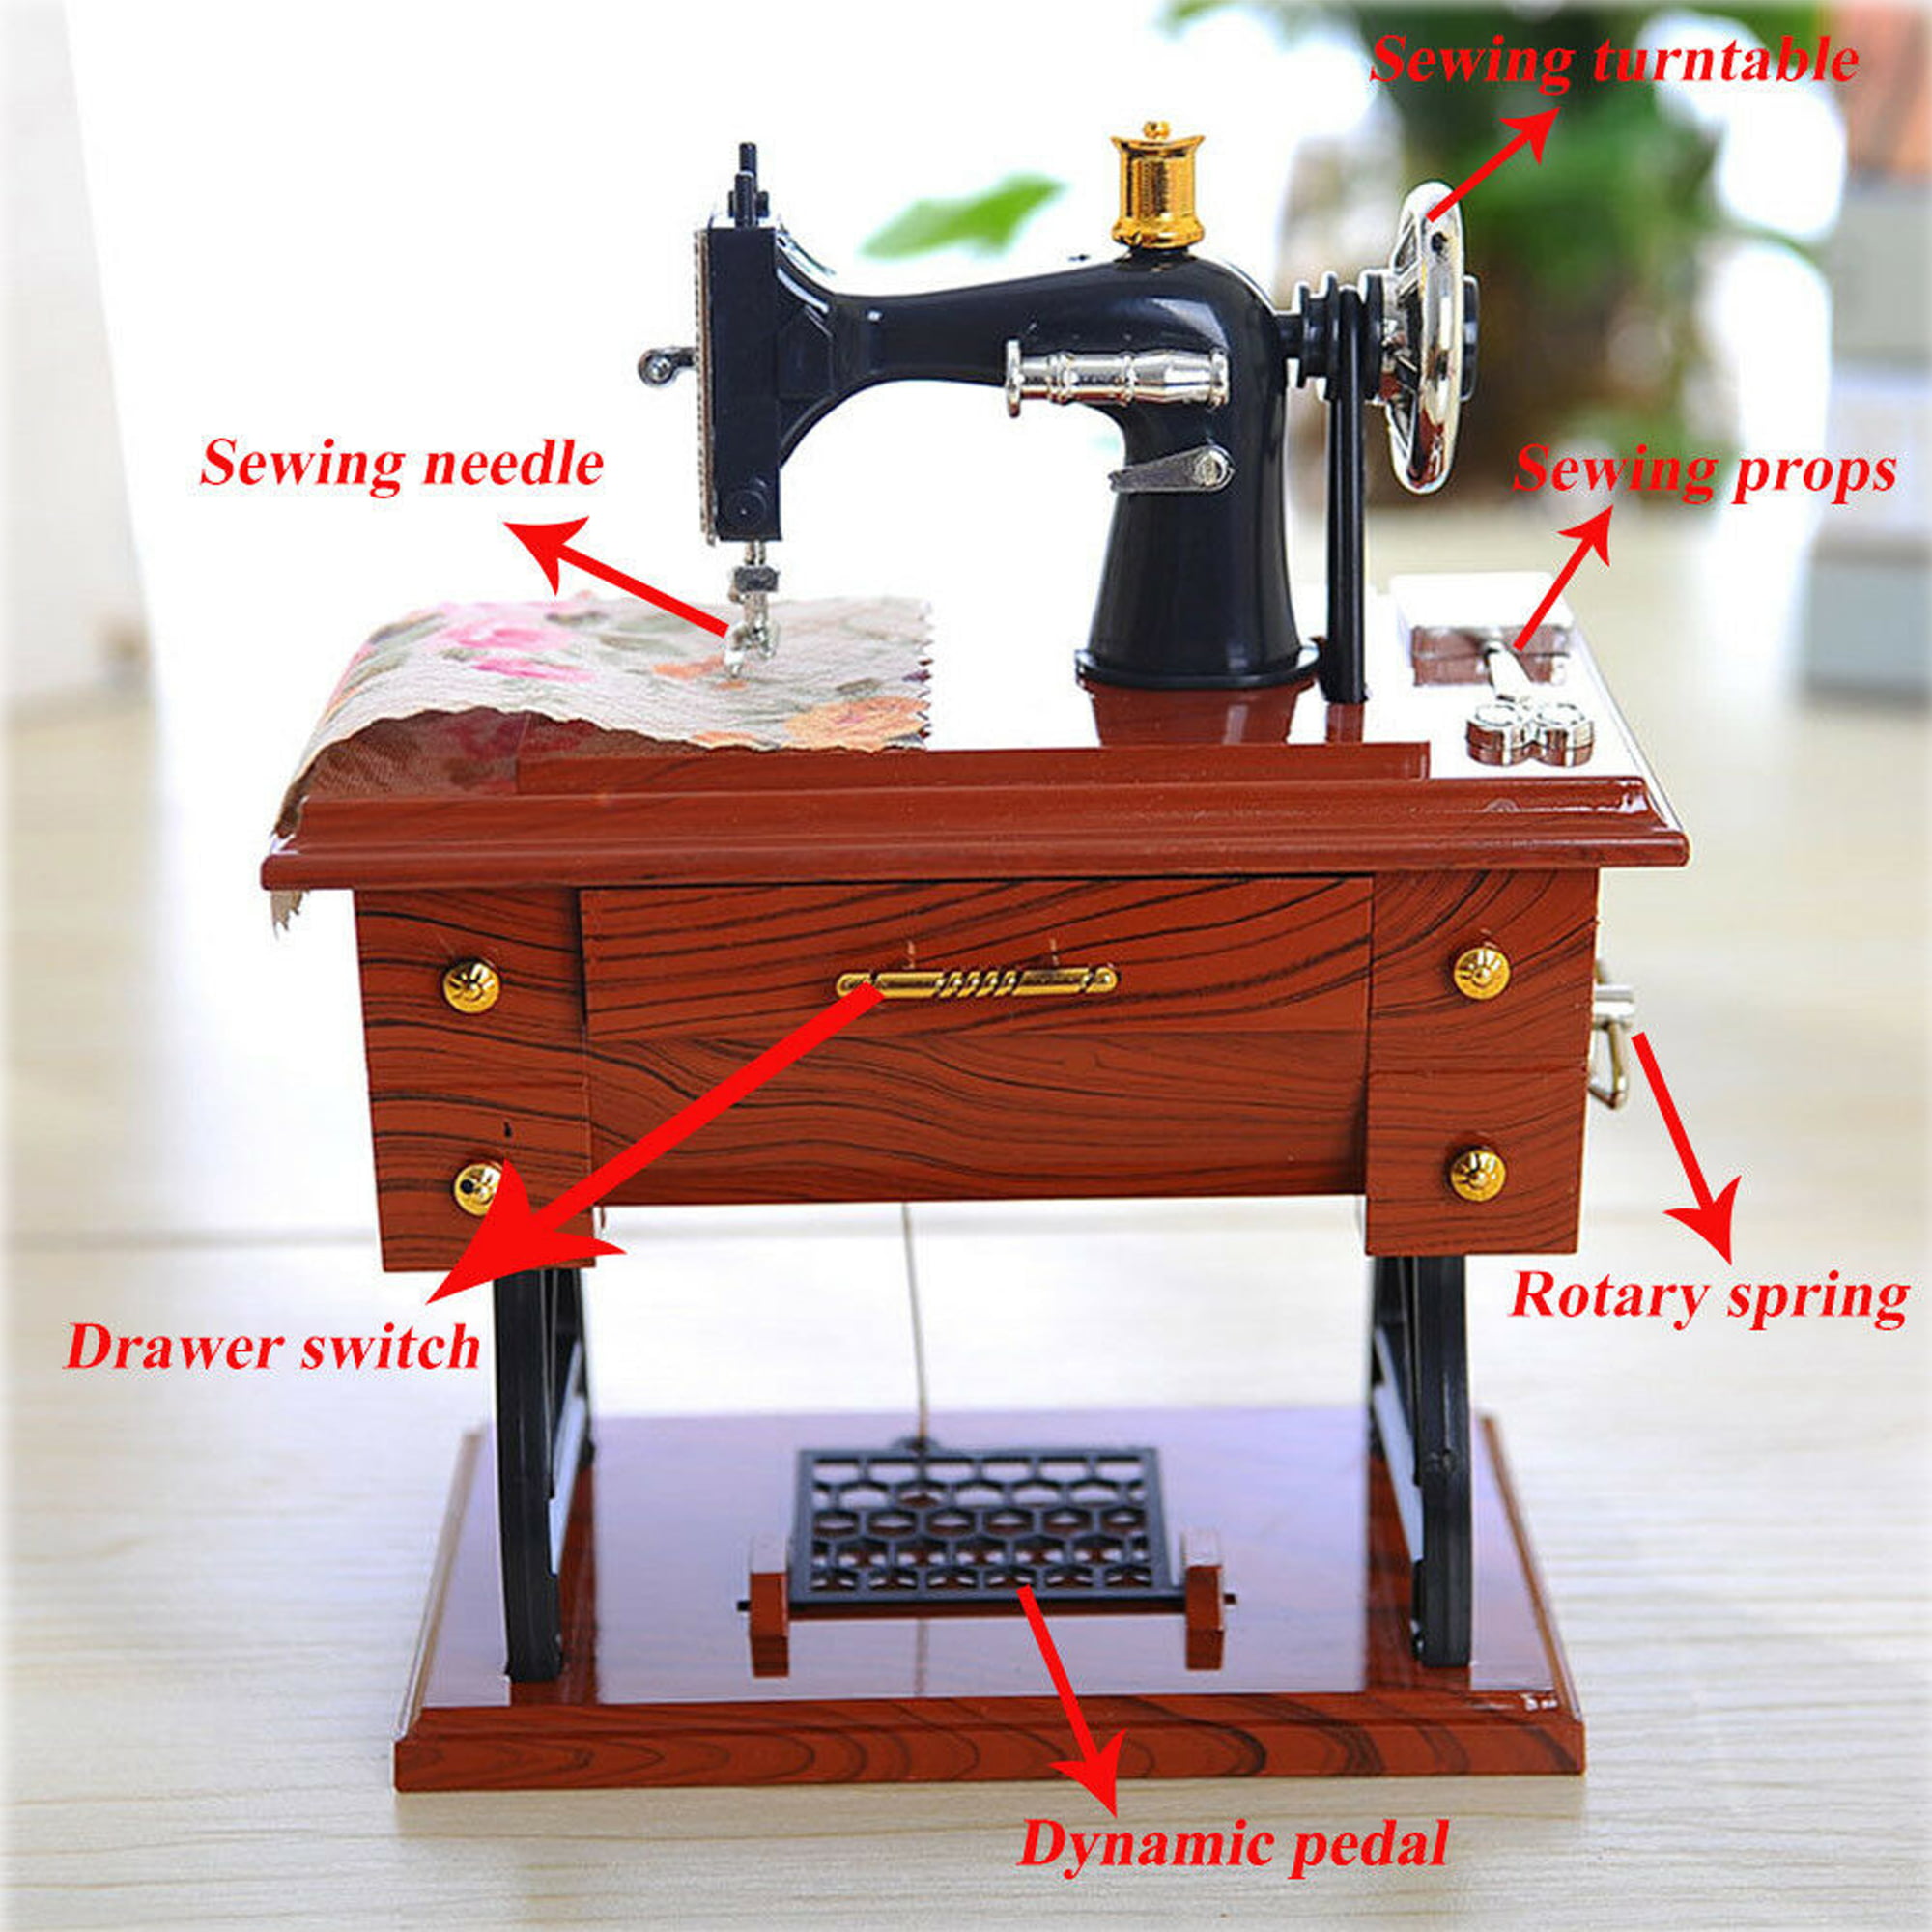 Sewing Machine Room Seamstress Tailor Mouse Vintage Art Decor Sign Wall Clock 